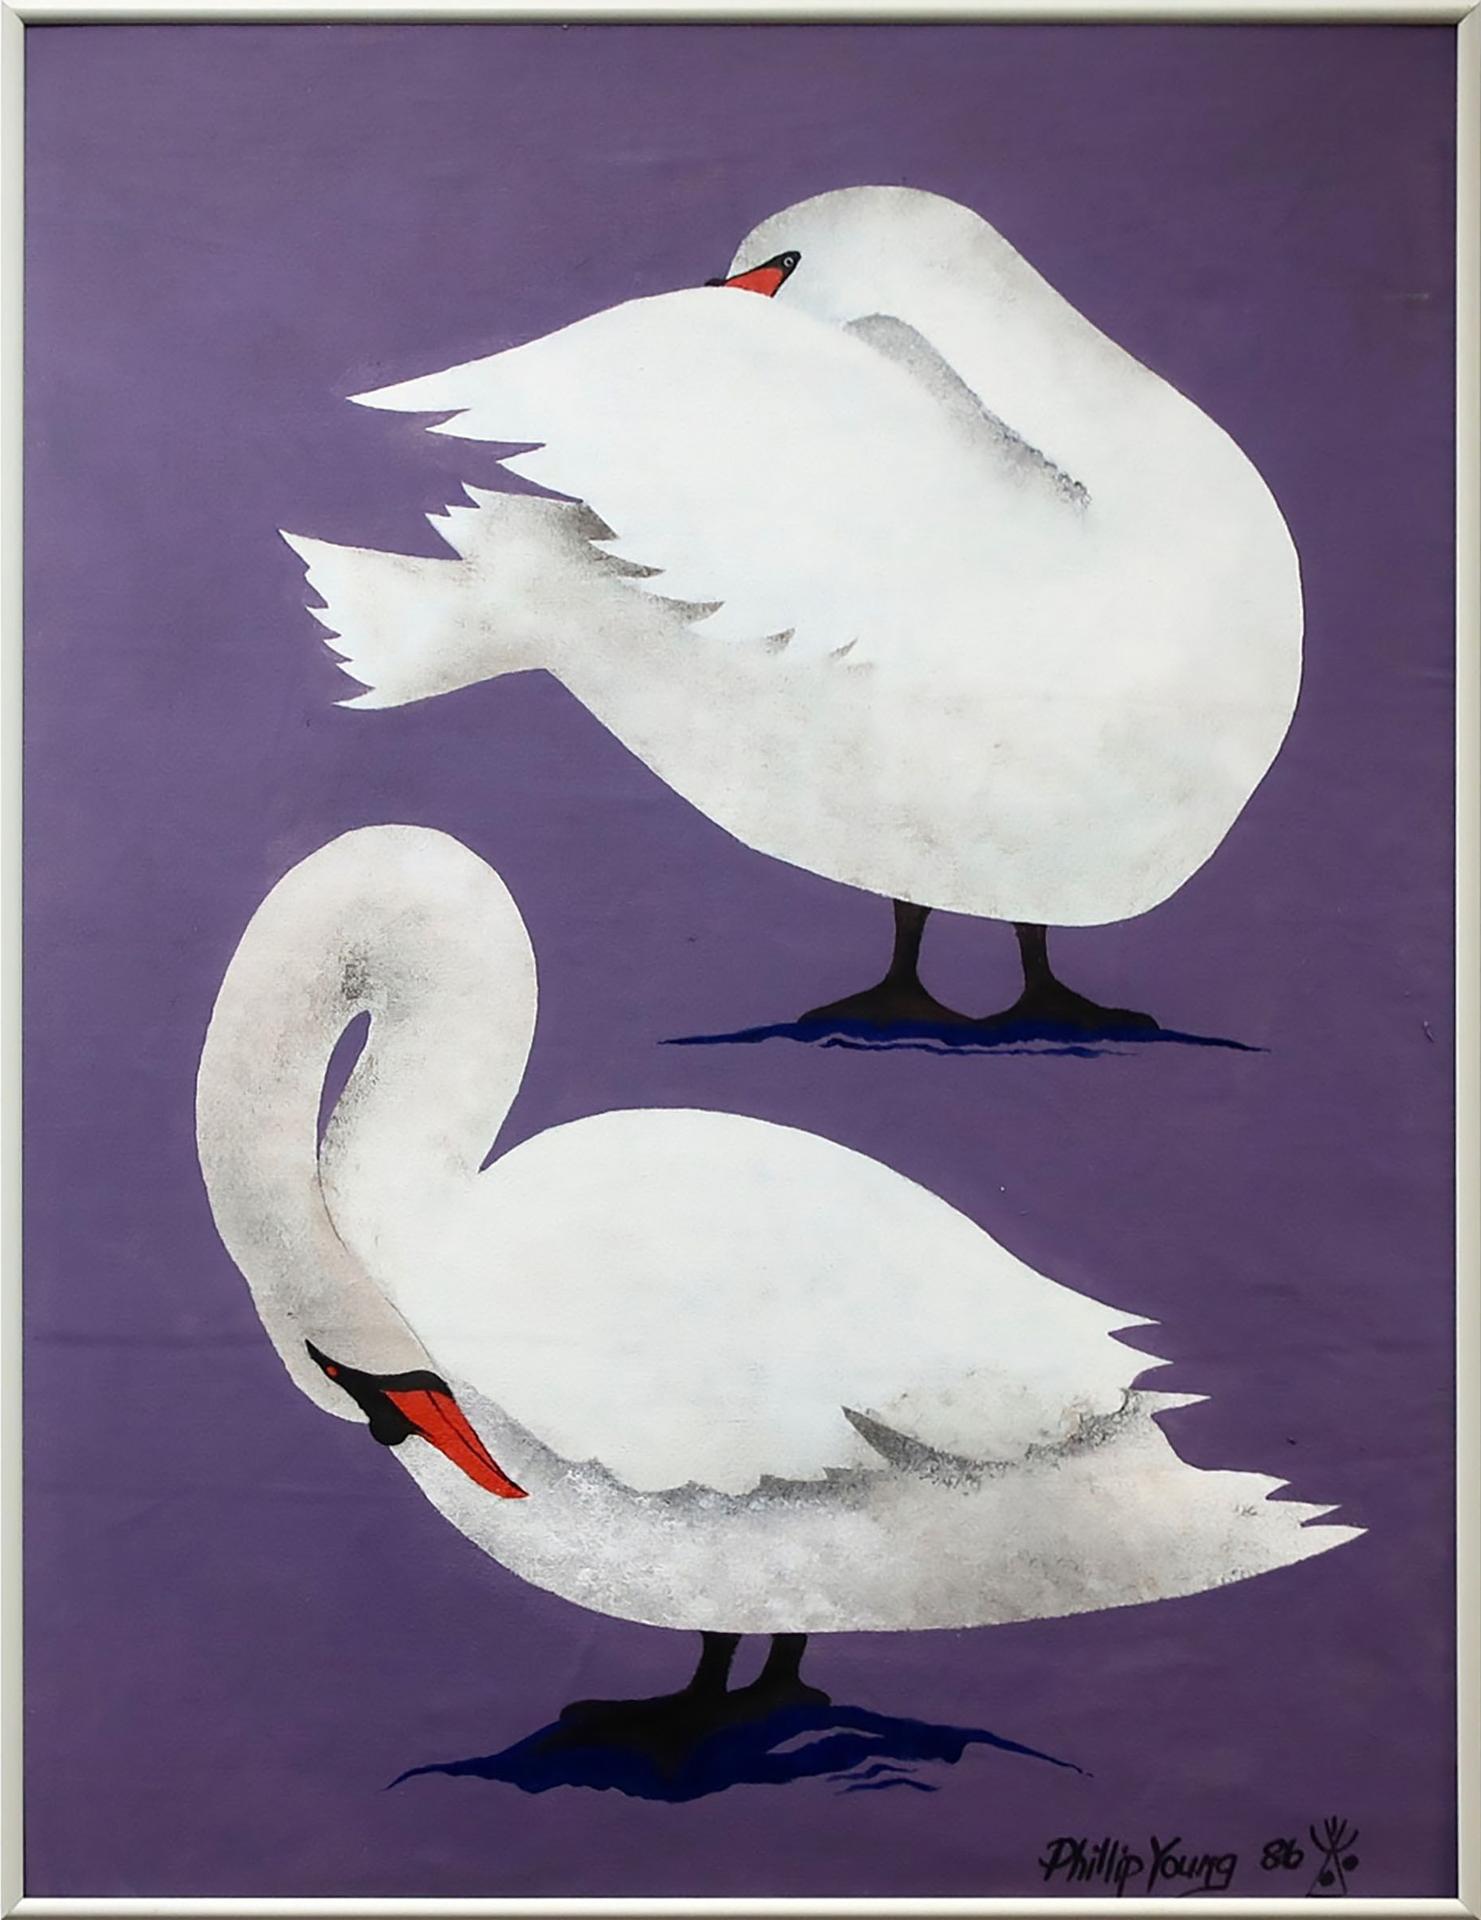 Phillip Young (1938-1993) - Swans